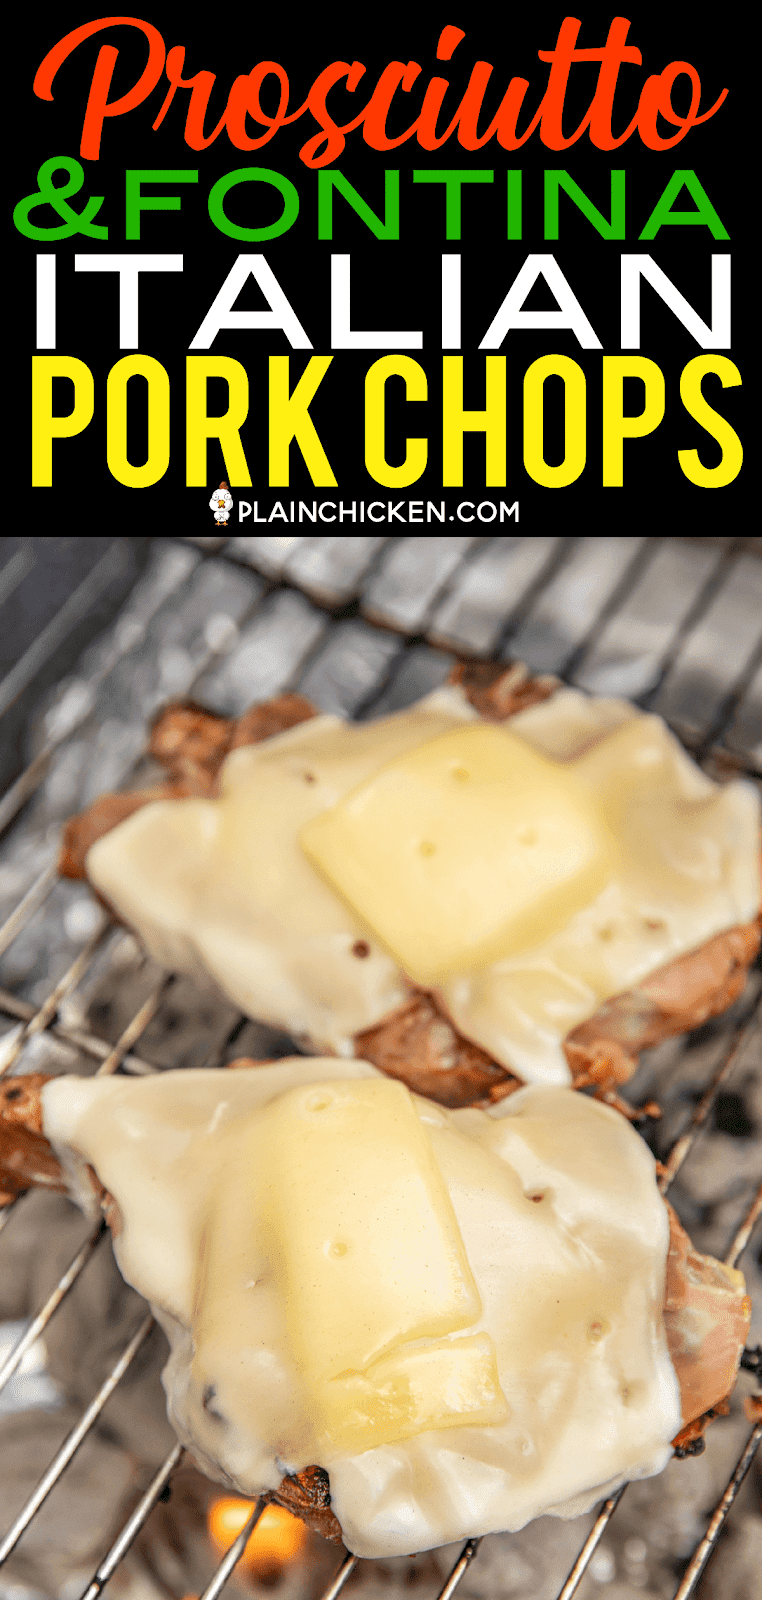 Prosciutto & Fontina Topped Italian Pork Chops - OMG! Better than any restaurant! These might be the BEST pork chops we've ever eaten! Pork chops marinated in Italian dressing and Worcestershire sauce then grilled and topped with prosciutto and Fontina cheese. Pork on pork with cheese! YUM! SO simple and they taste AMAZING! #porkchop #grilling